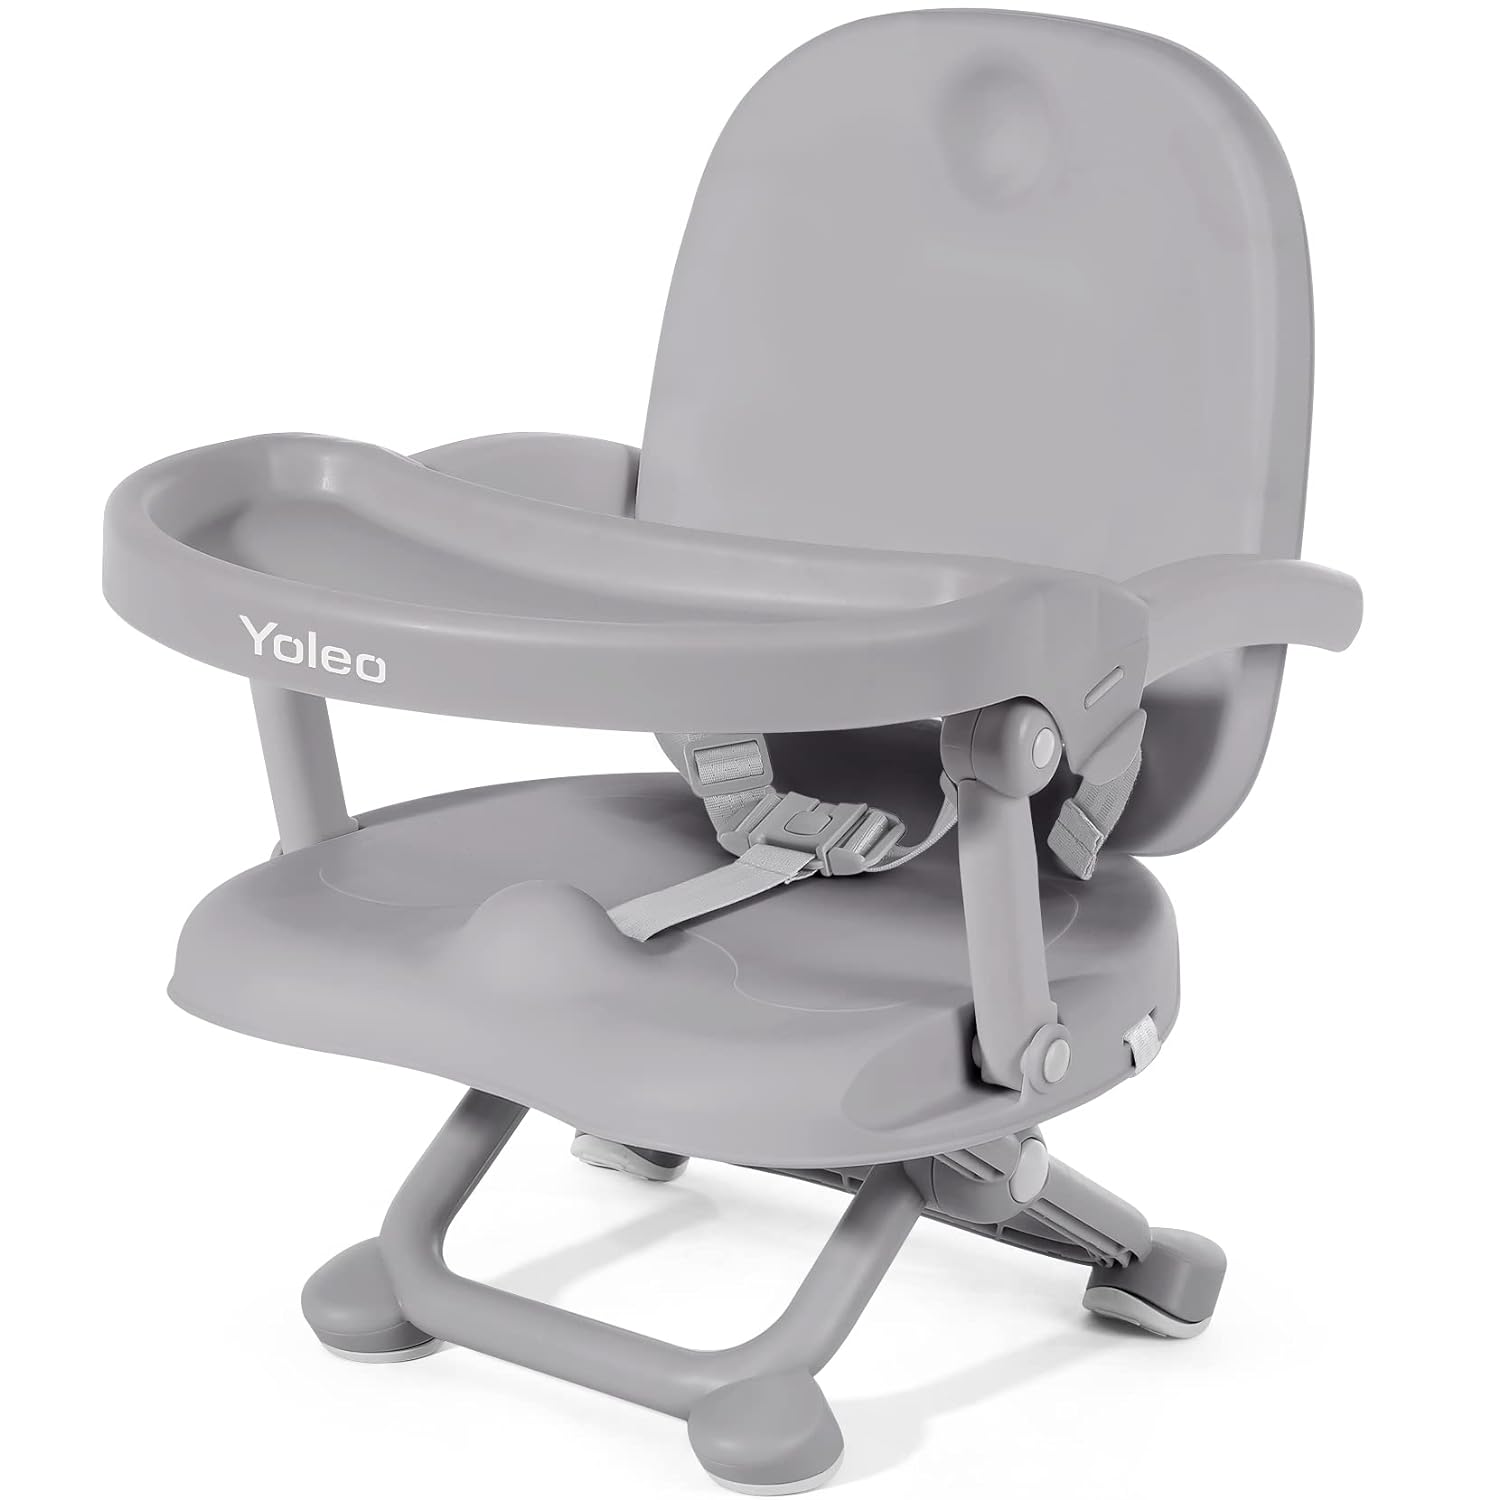 https://bigbigmart.com/wp-content/uploads/2023/10/YOLEO-Baby-High-Chair-Booster-Seat-for-Dining-Table-Adjustable-Height-Travel-Booster-Seat-with-Tray-Toddler-Booster-Seat-Easy-Clean-No-Cushion-Grey.jpg